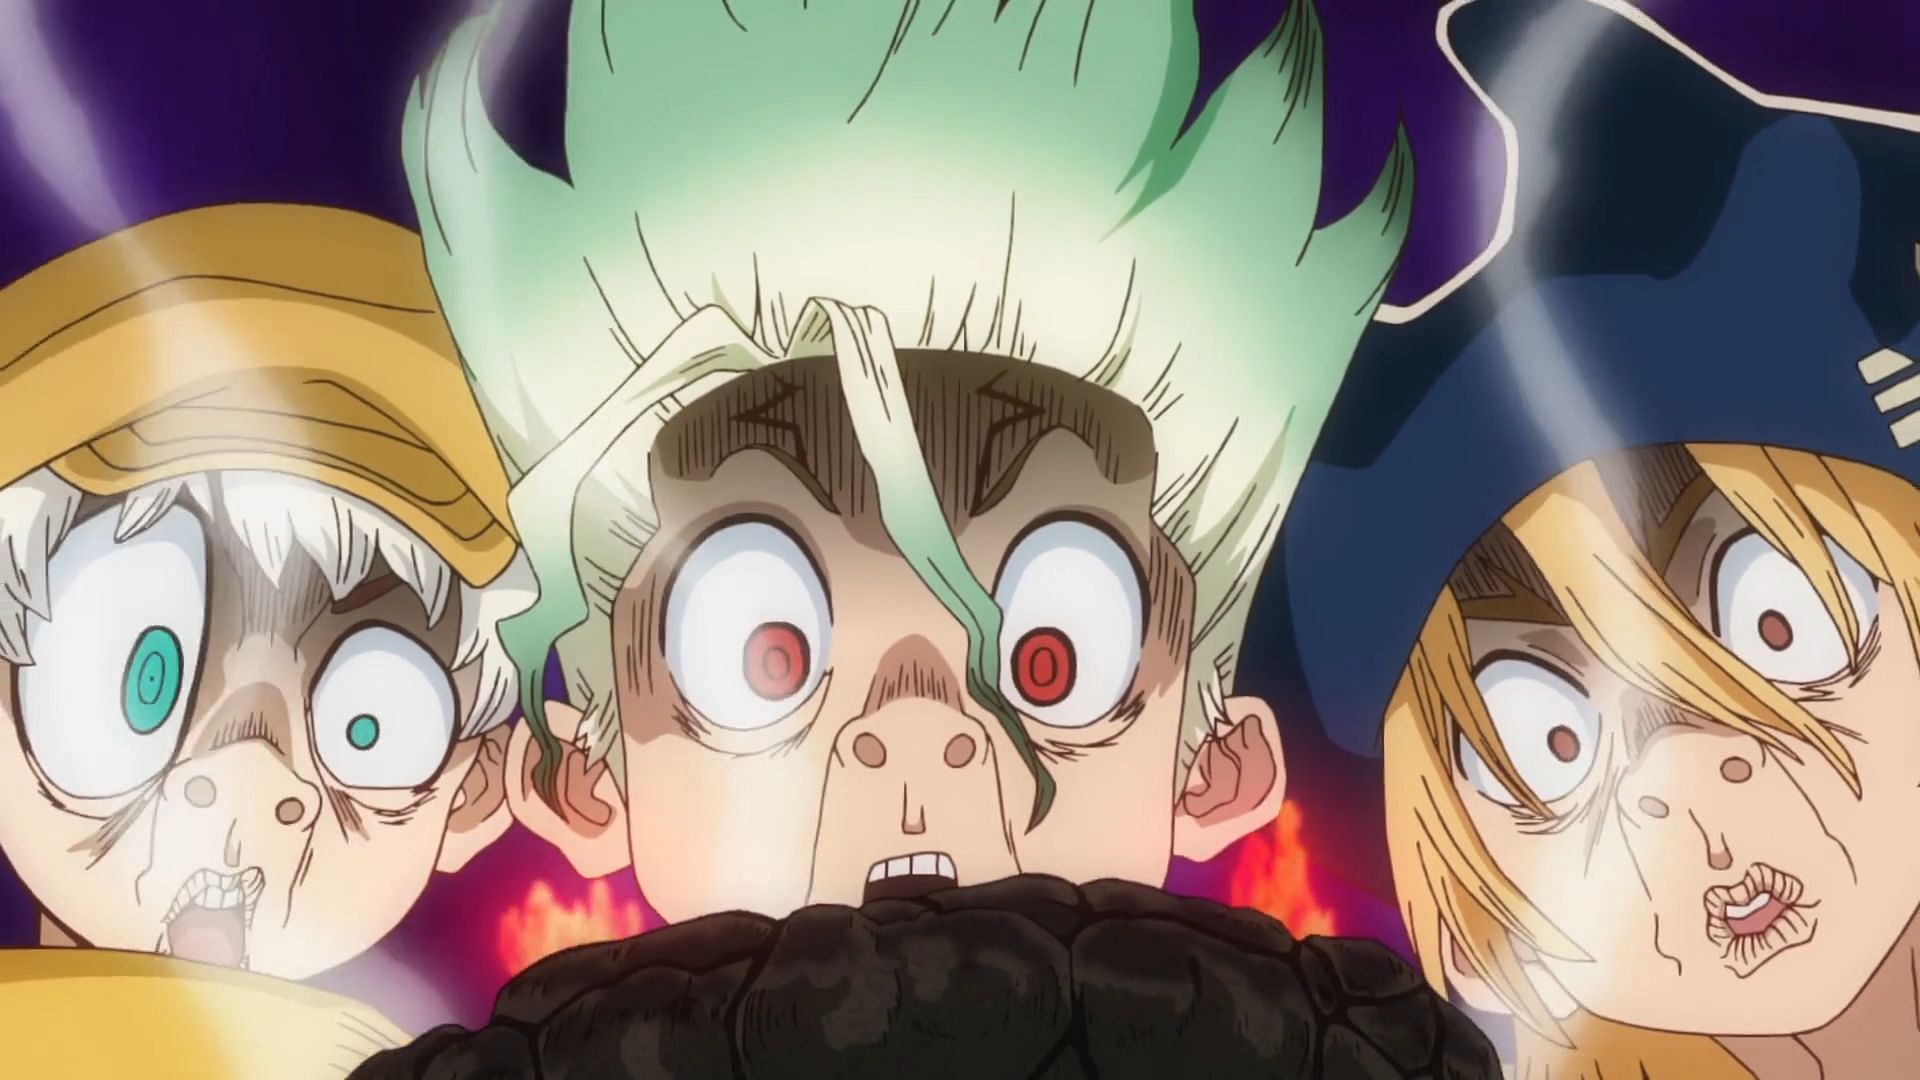 Dr. Stone season 3 part 2 release date, cast, plot and more